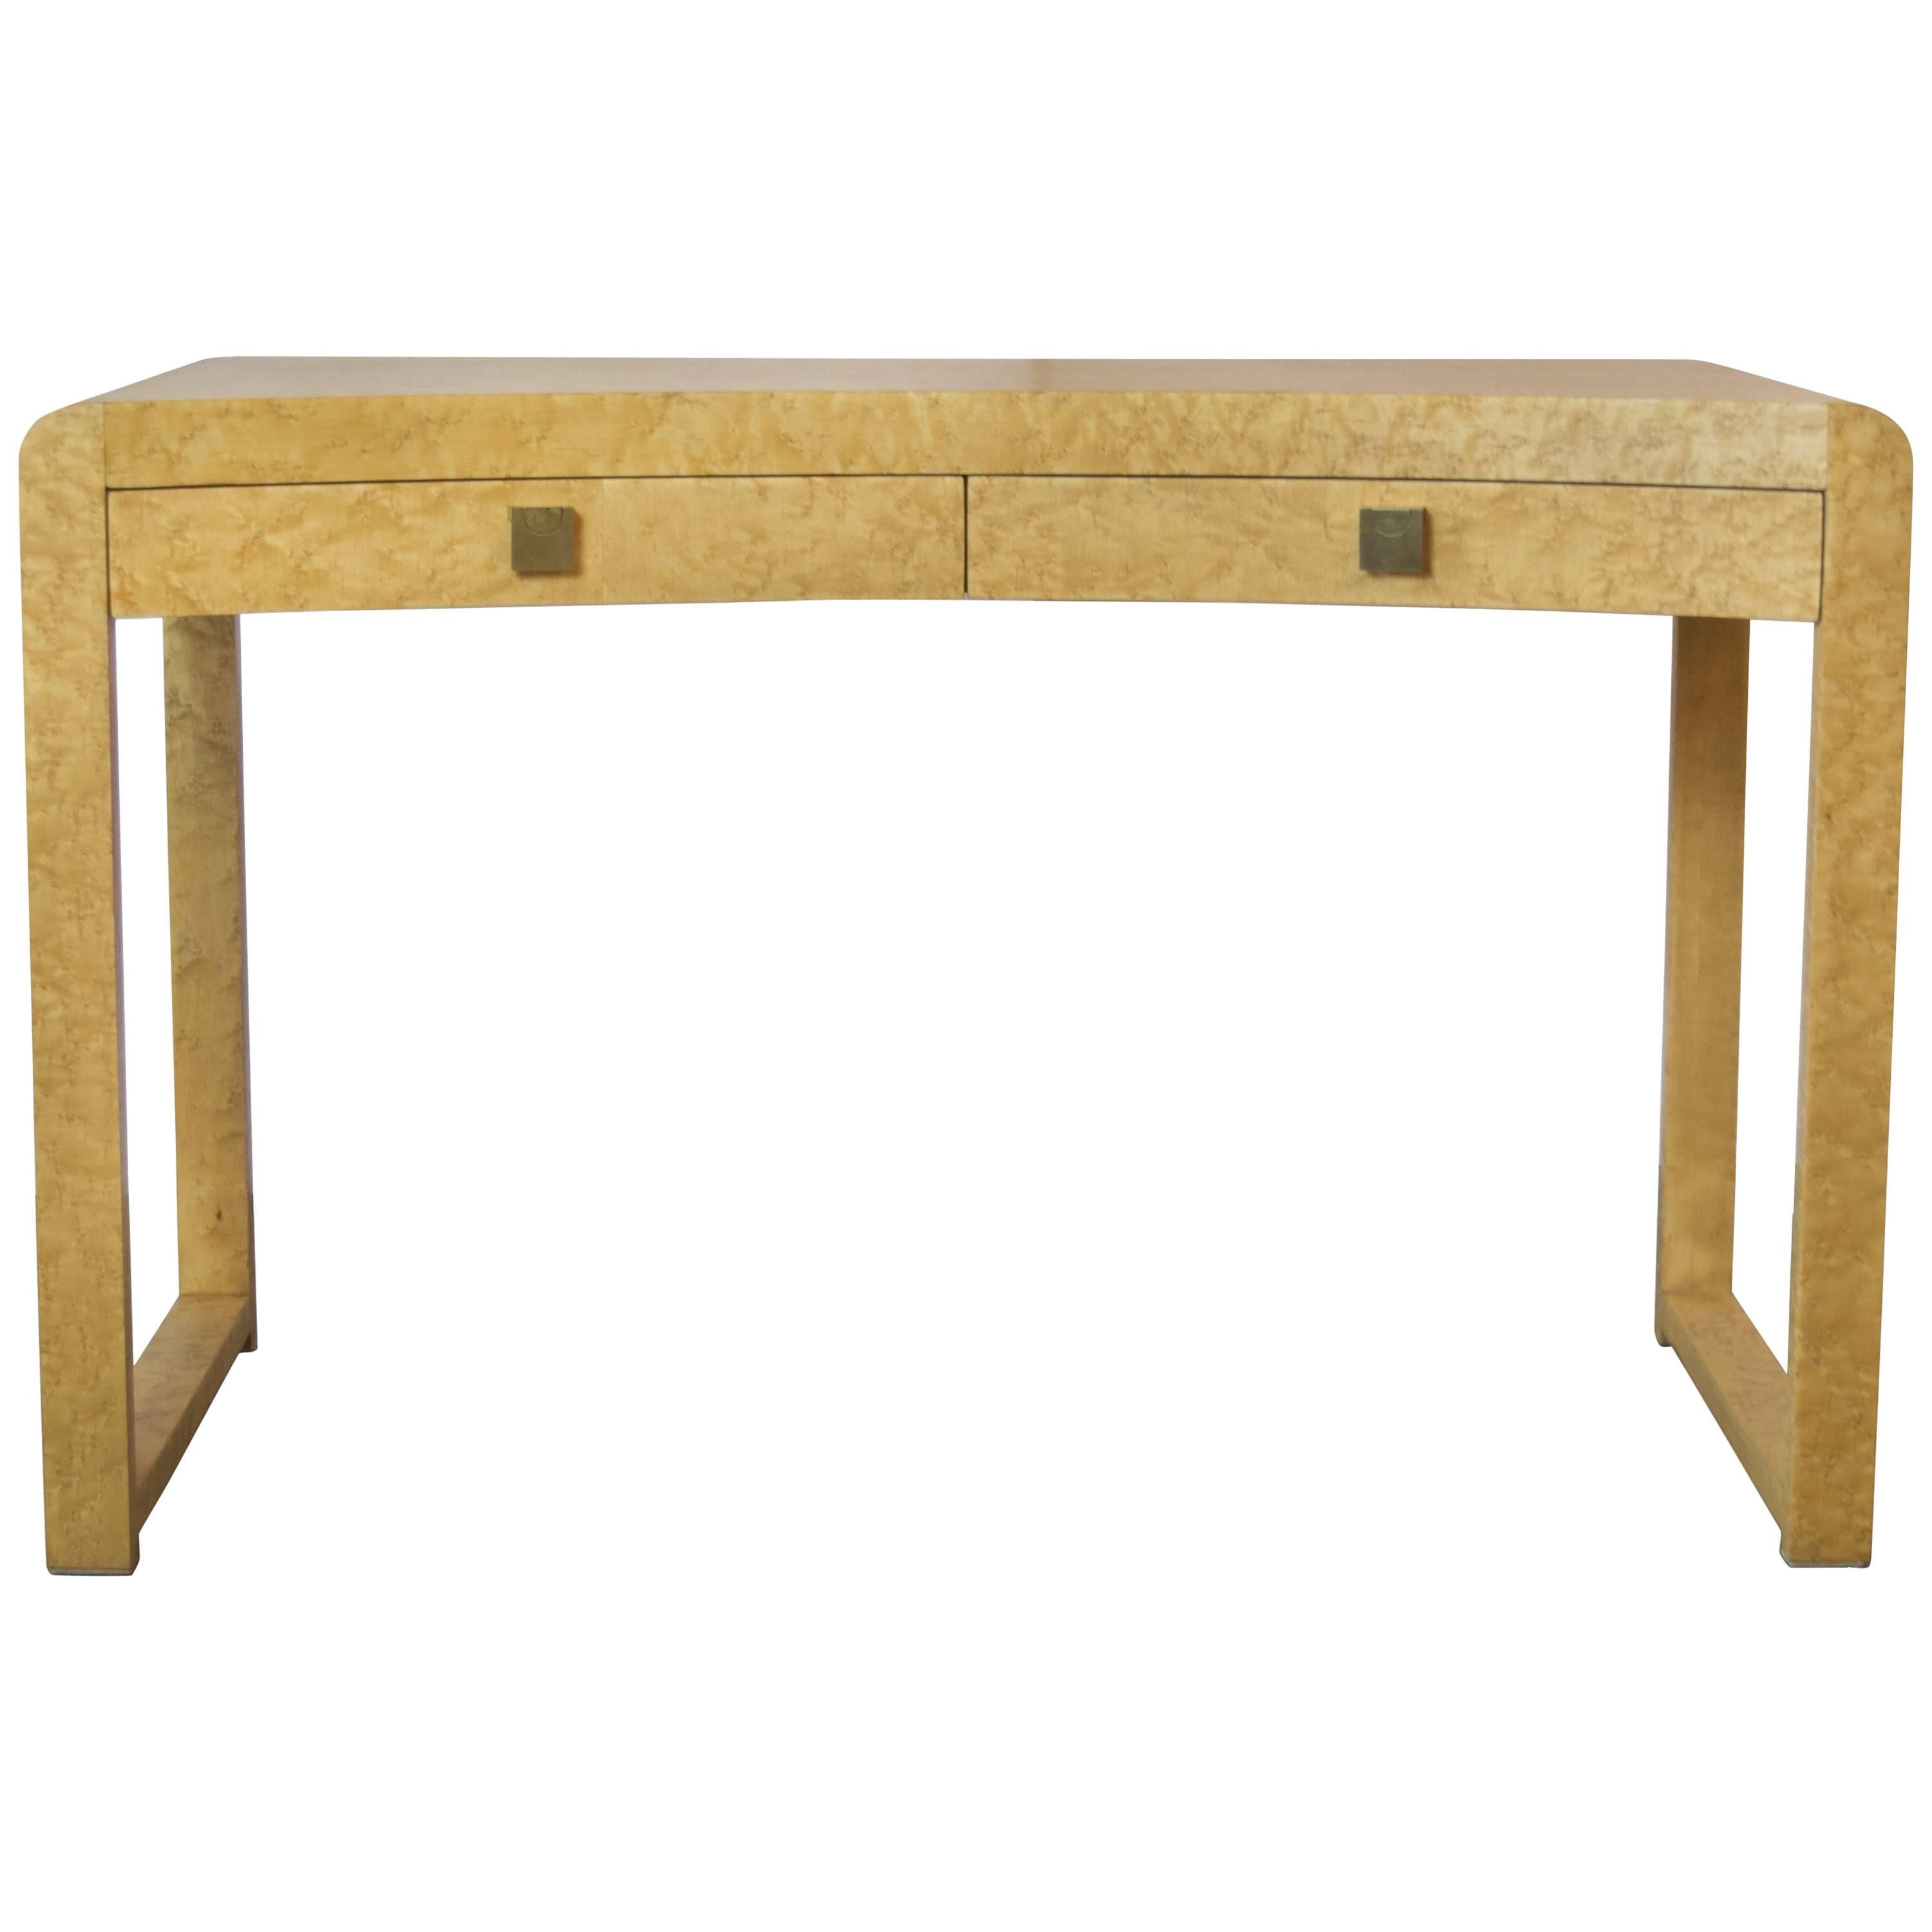 Beautiful Birds-Eye Maple Desk, Vanity or Sofa Table with Brass Drawer Handles